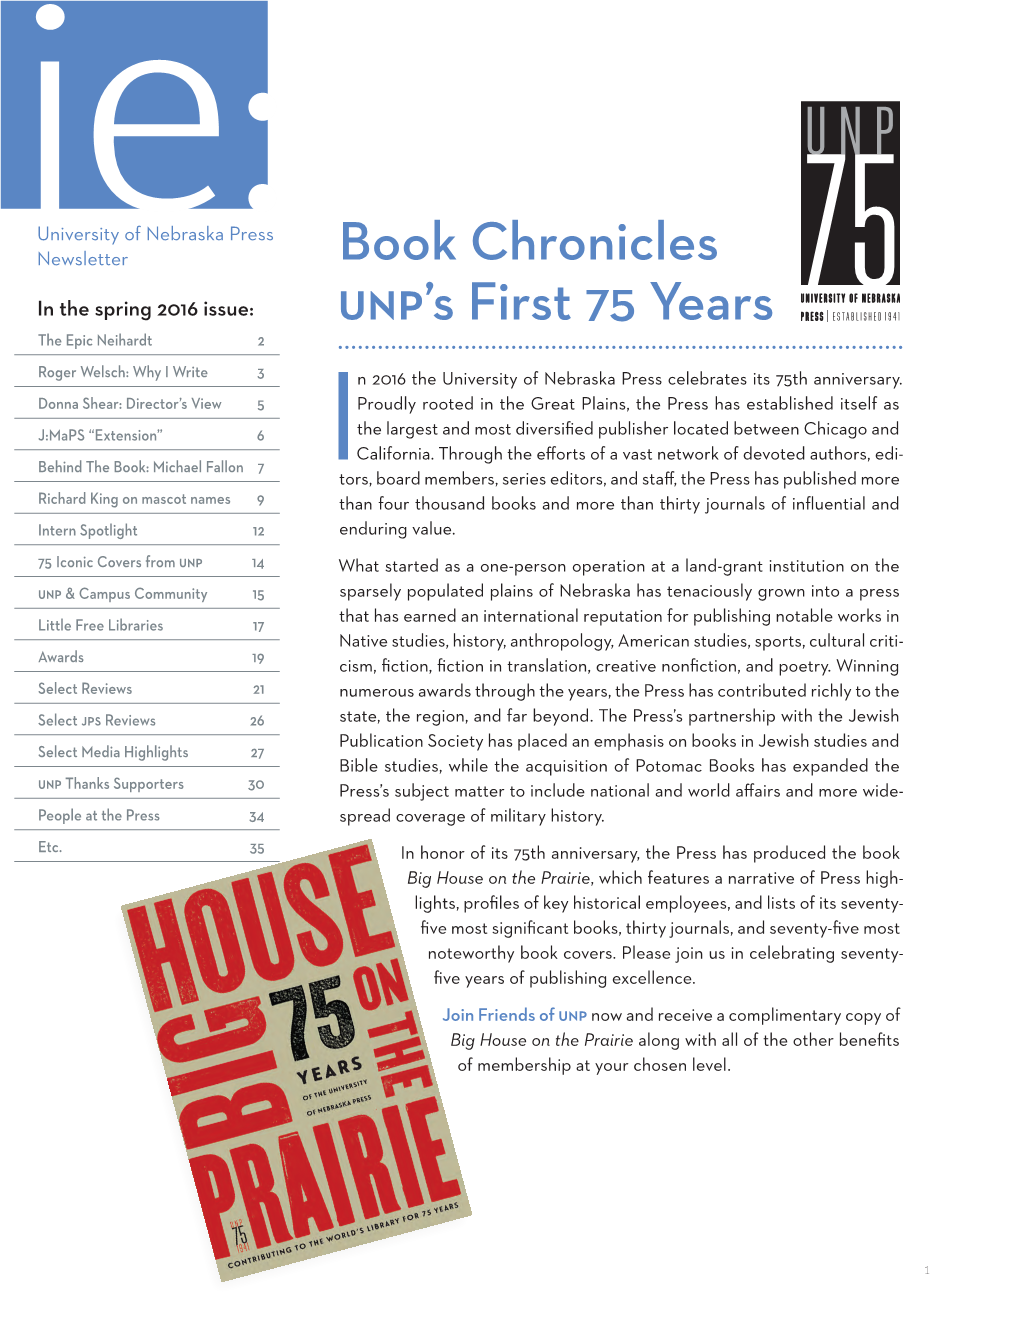 Book Chronicles UNP's First 75 Years